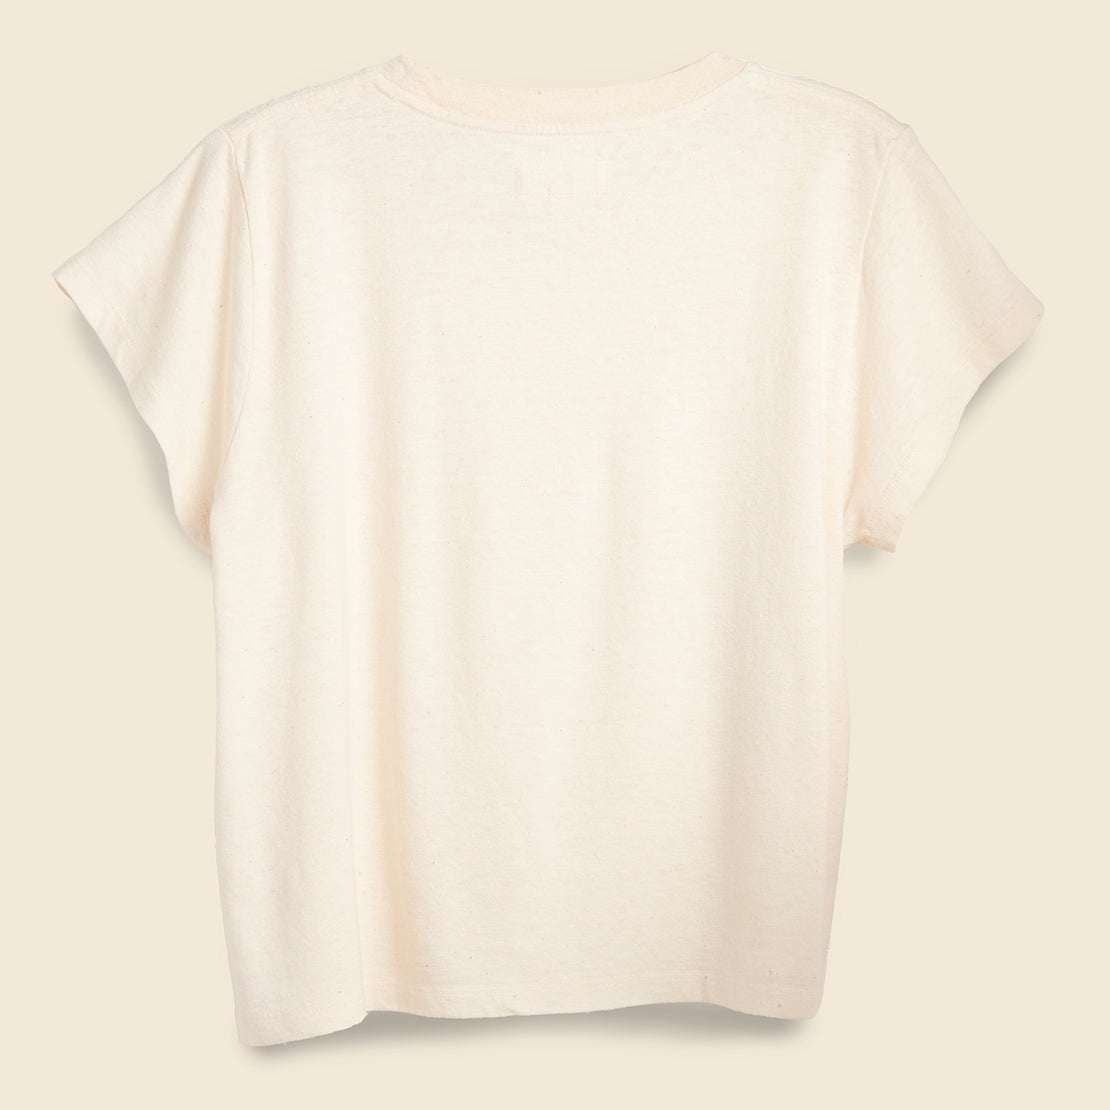 Q Tee - Natural - Mollusk - STAG Provisions - W - Tops - S/S Tee